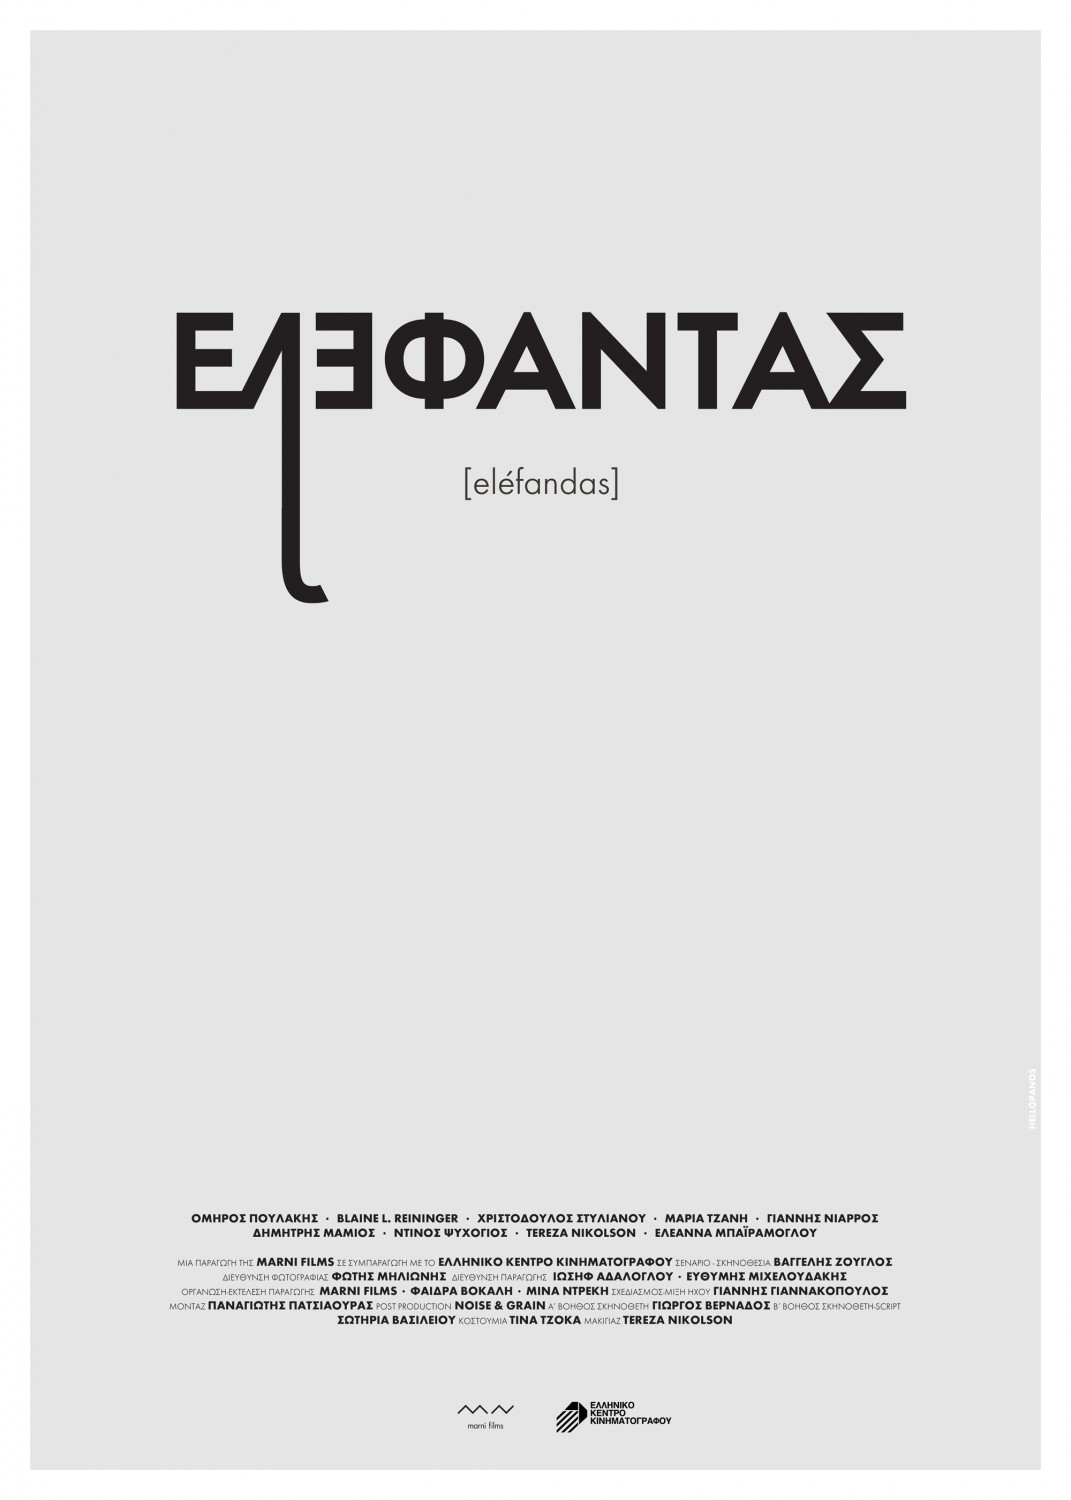 Extra Large Movie Poster Image for Elephantas